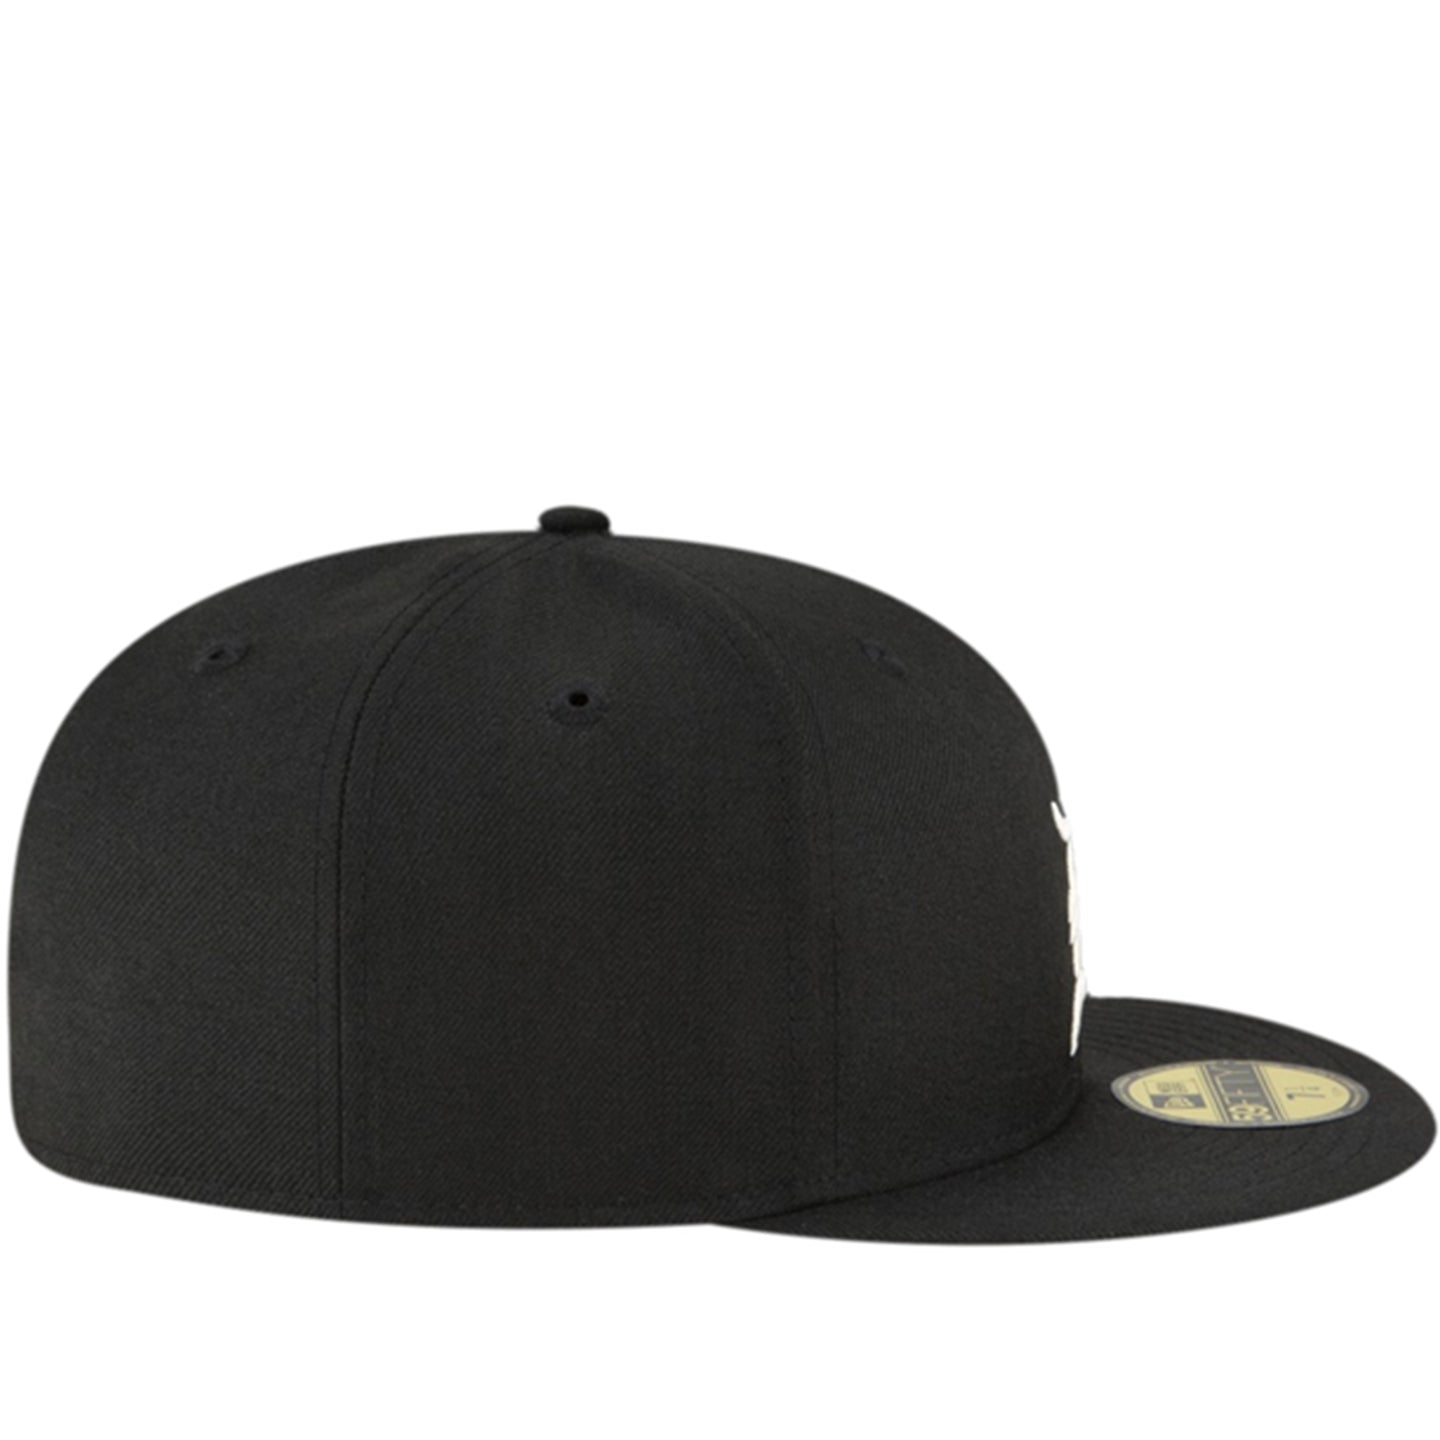 FEAR OF GOD ESSENTIALS NEW ERA FITTED BLACK